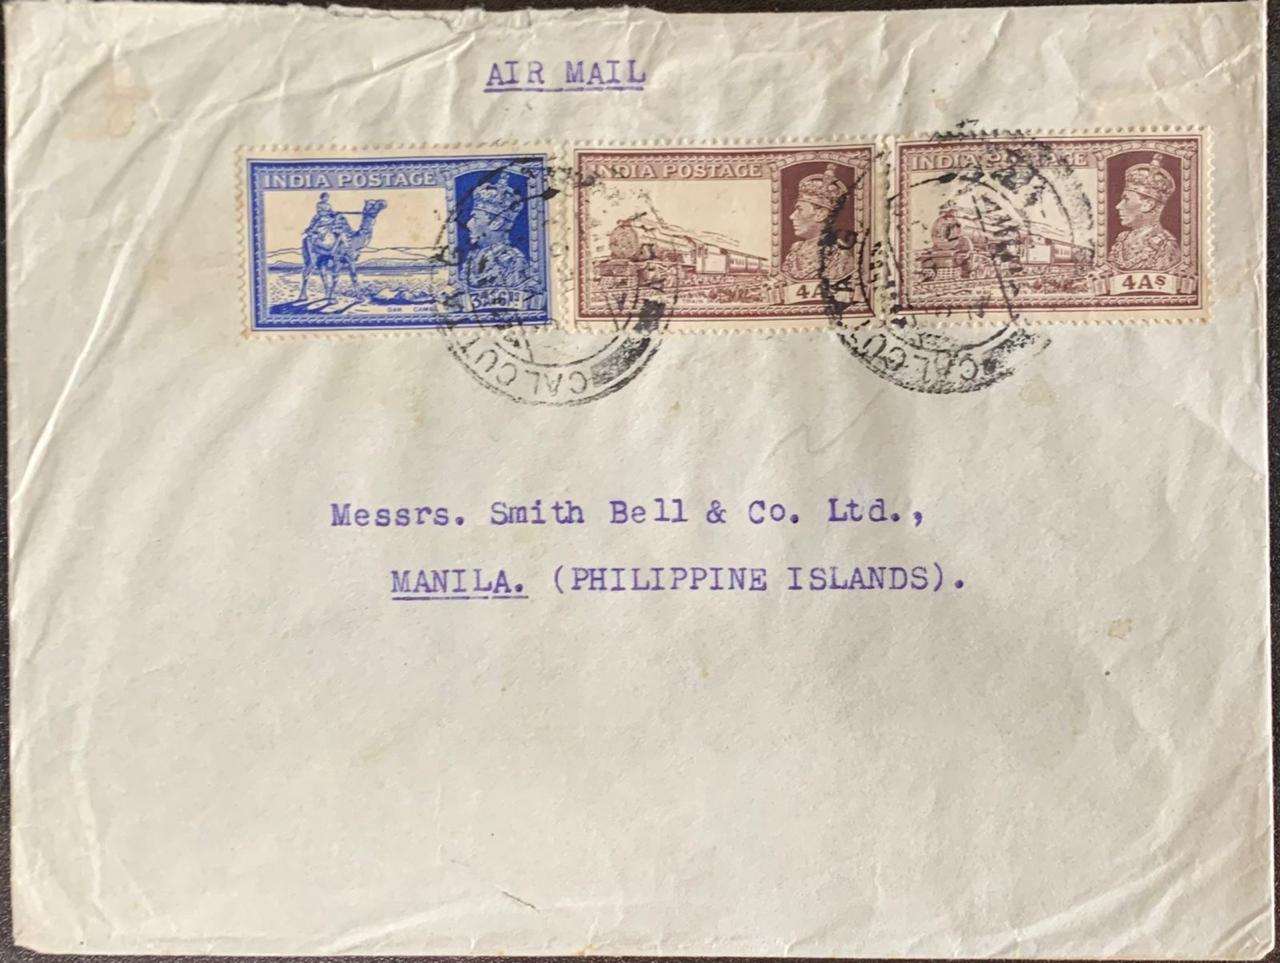 India 1937 Cover with Airmail Stamps to Manila Philippines Islands